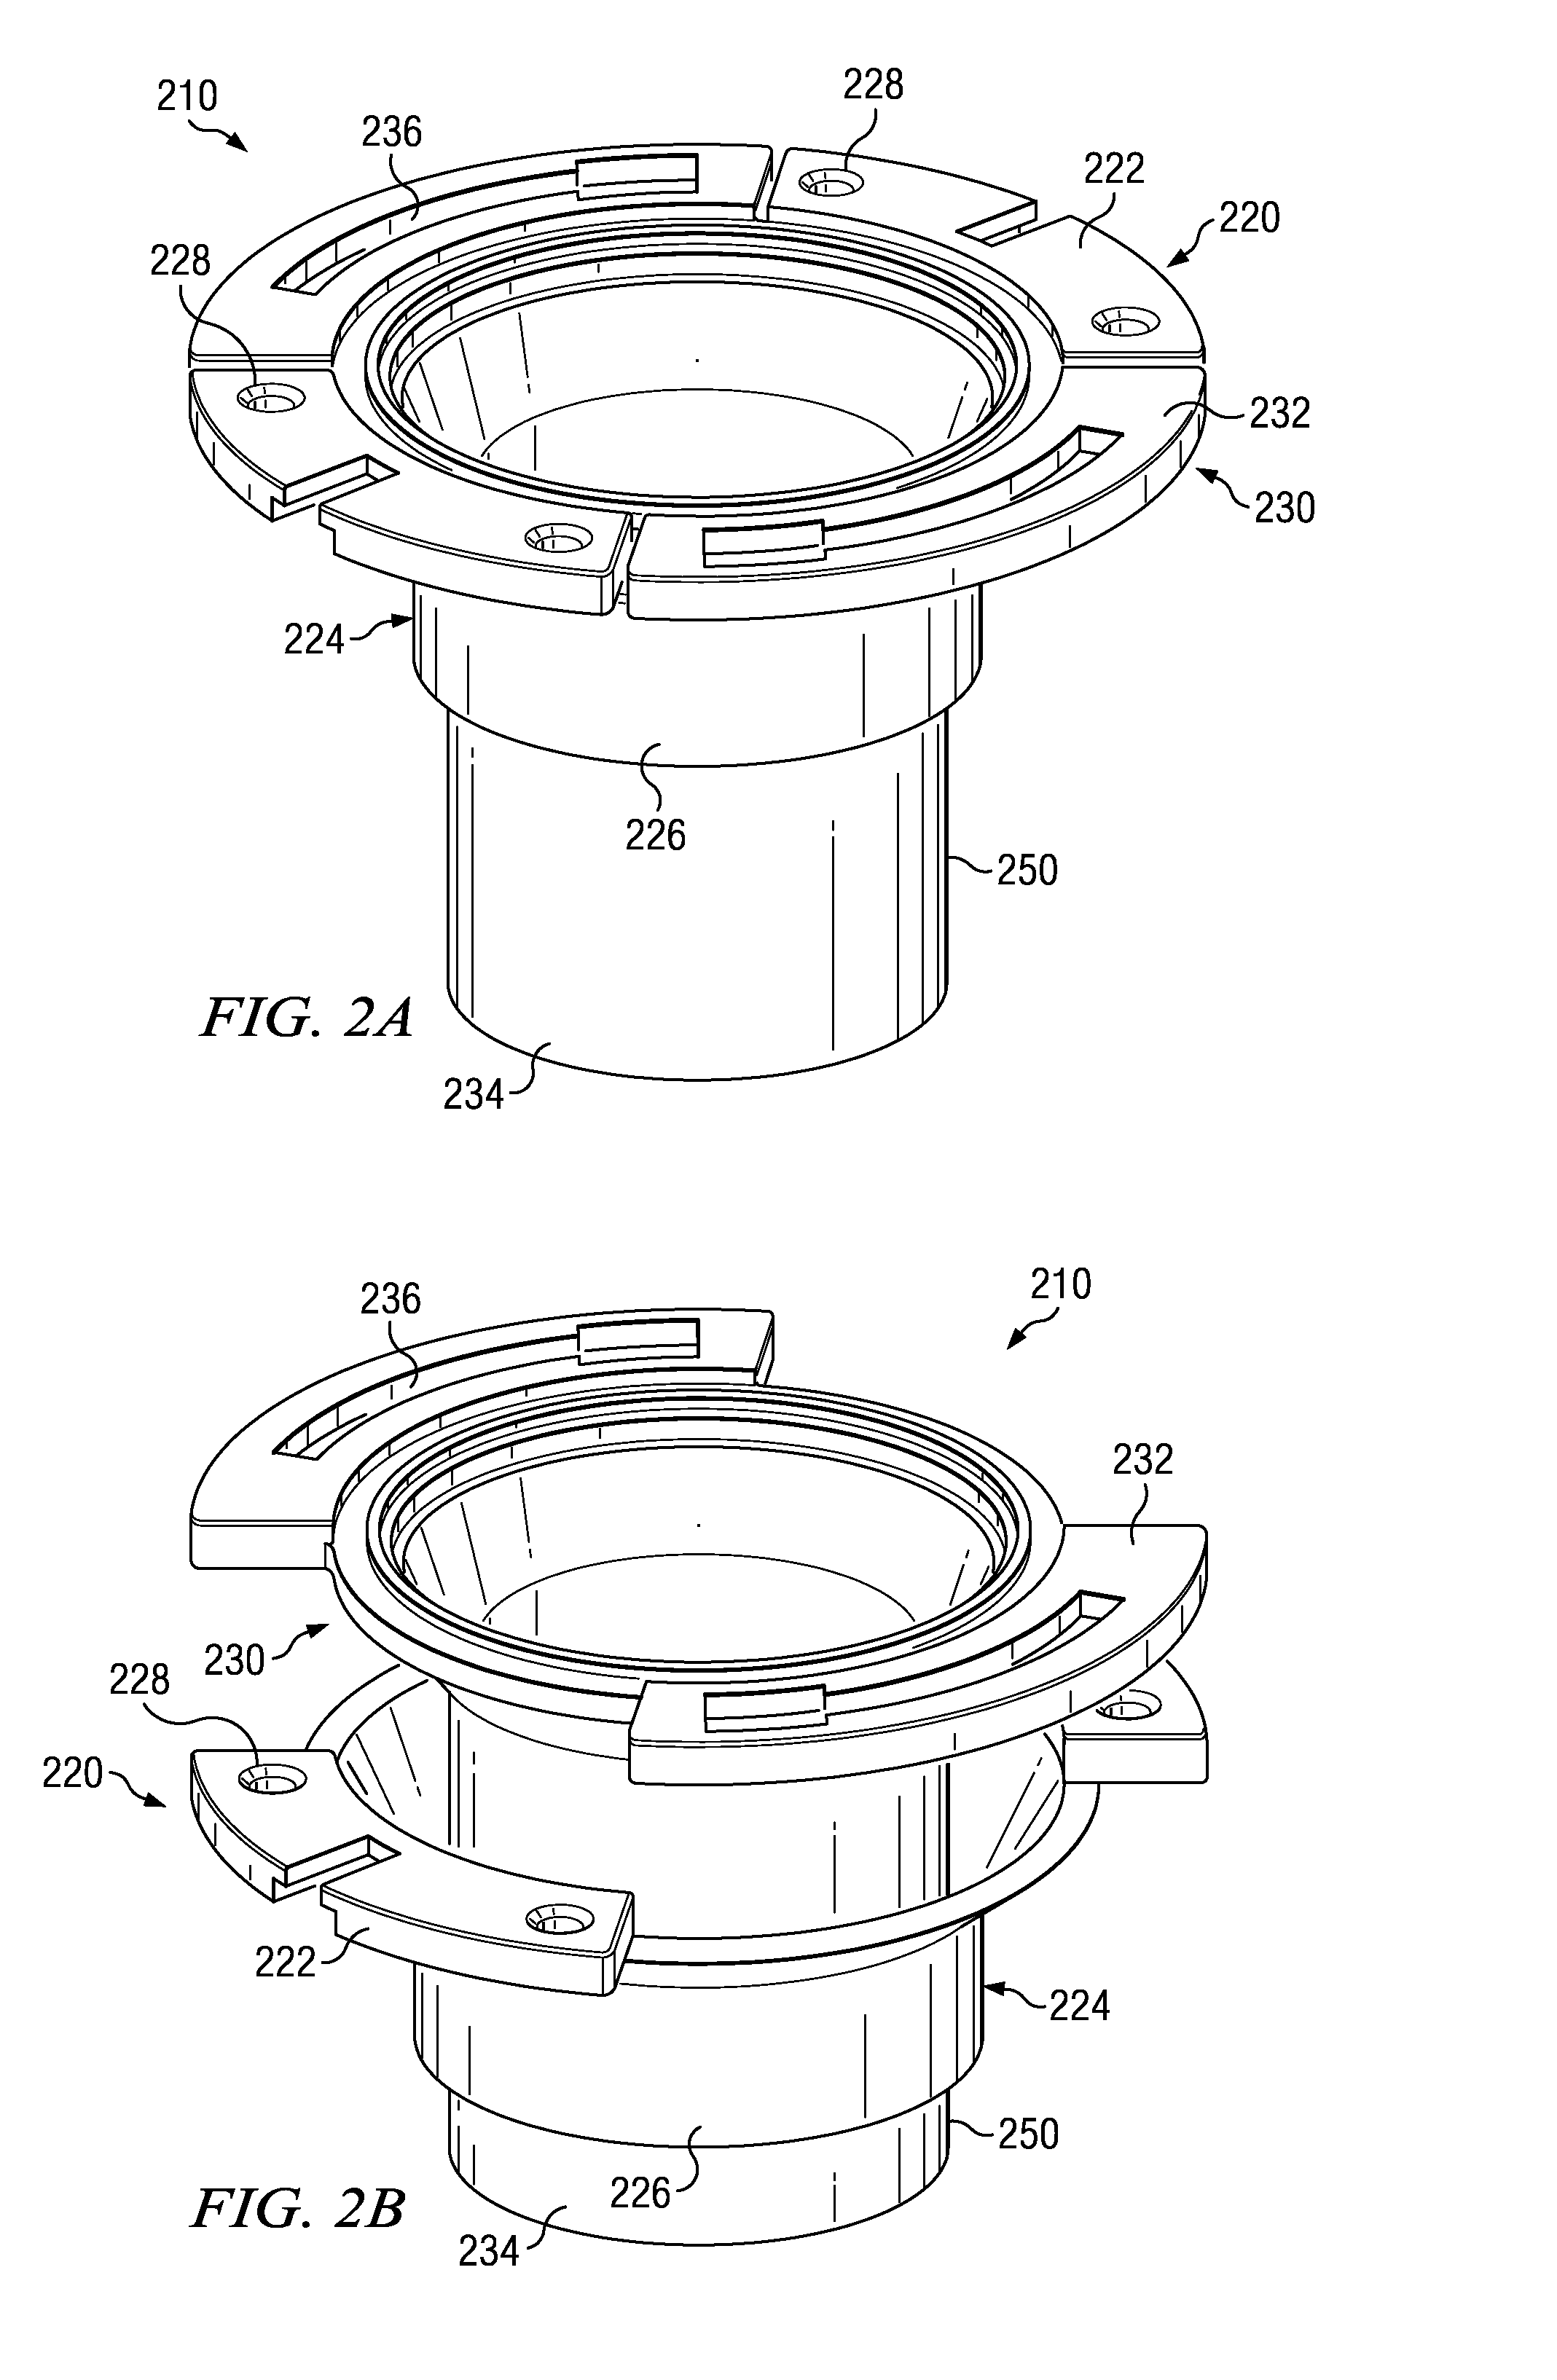 Extendable Flange Apparatus and Methods